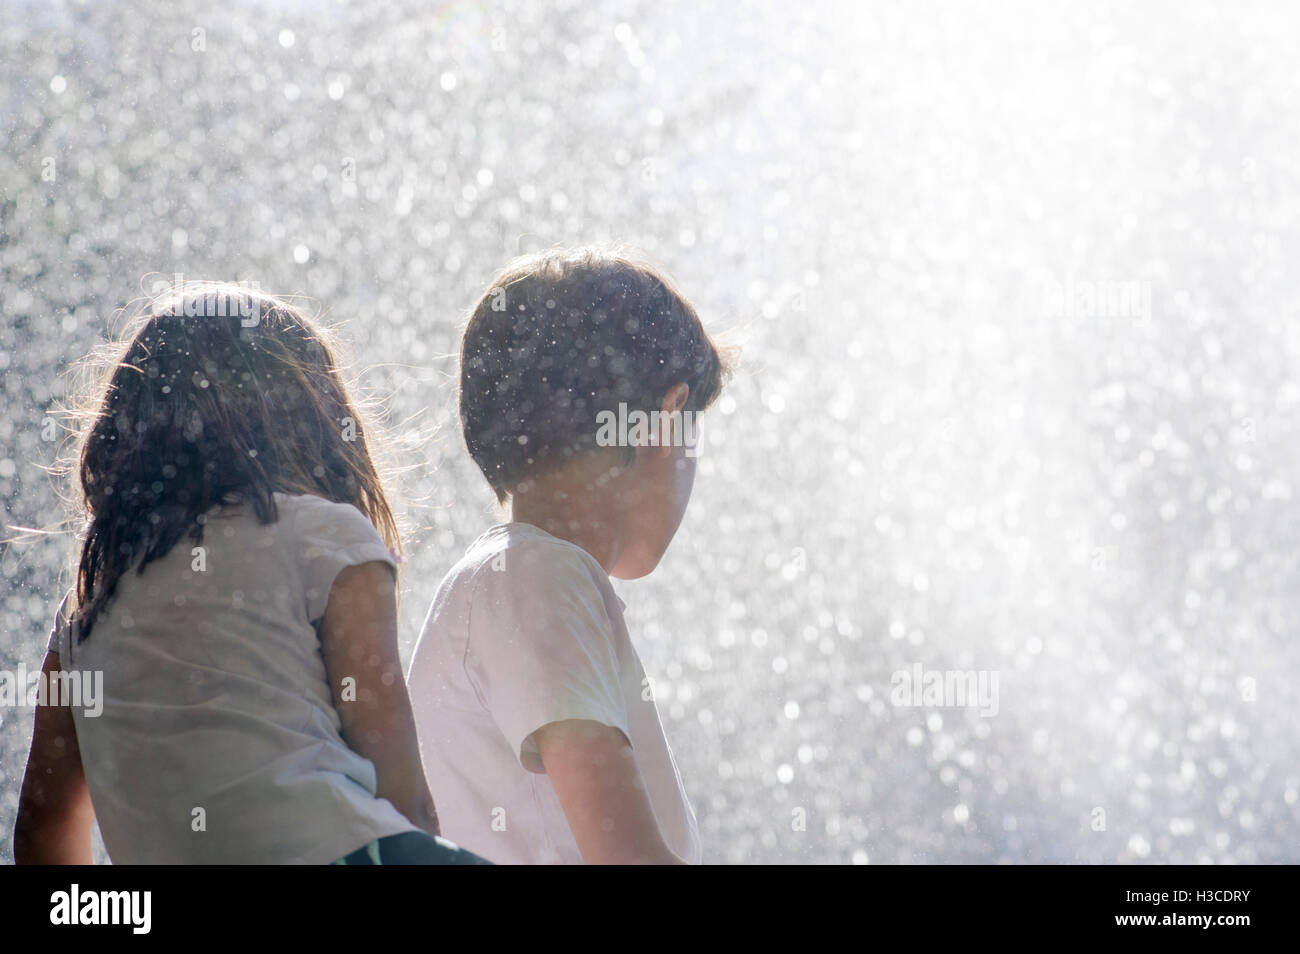 Children surrounded by spray from waterfall Stock Photo